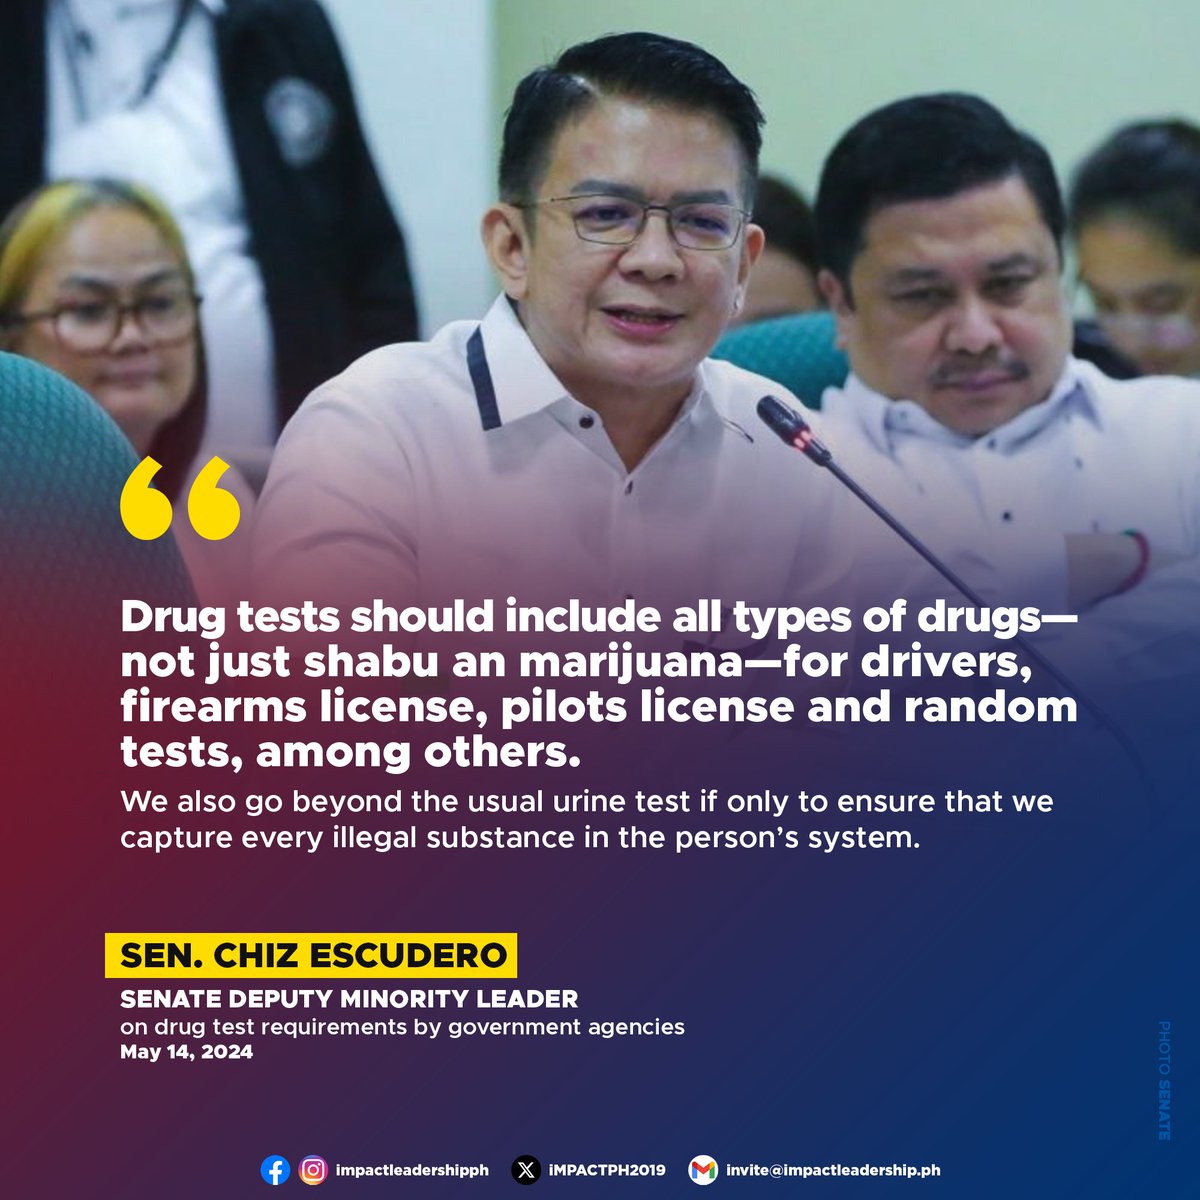 'DRUG TESTS SHOULD INCLUDE ALL TYPES OF DRUGS'

Sen. Chiz Escudero says drug test requirements by government agencies should encompass all types of drugs, including so-called 'rich man's drugs' such as cocaine and ecstasy.